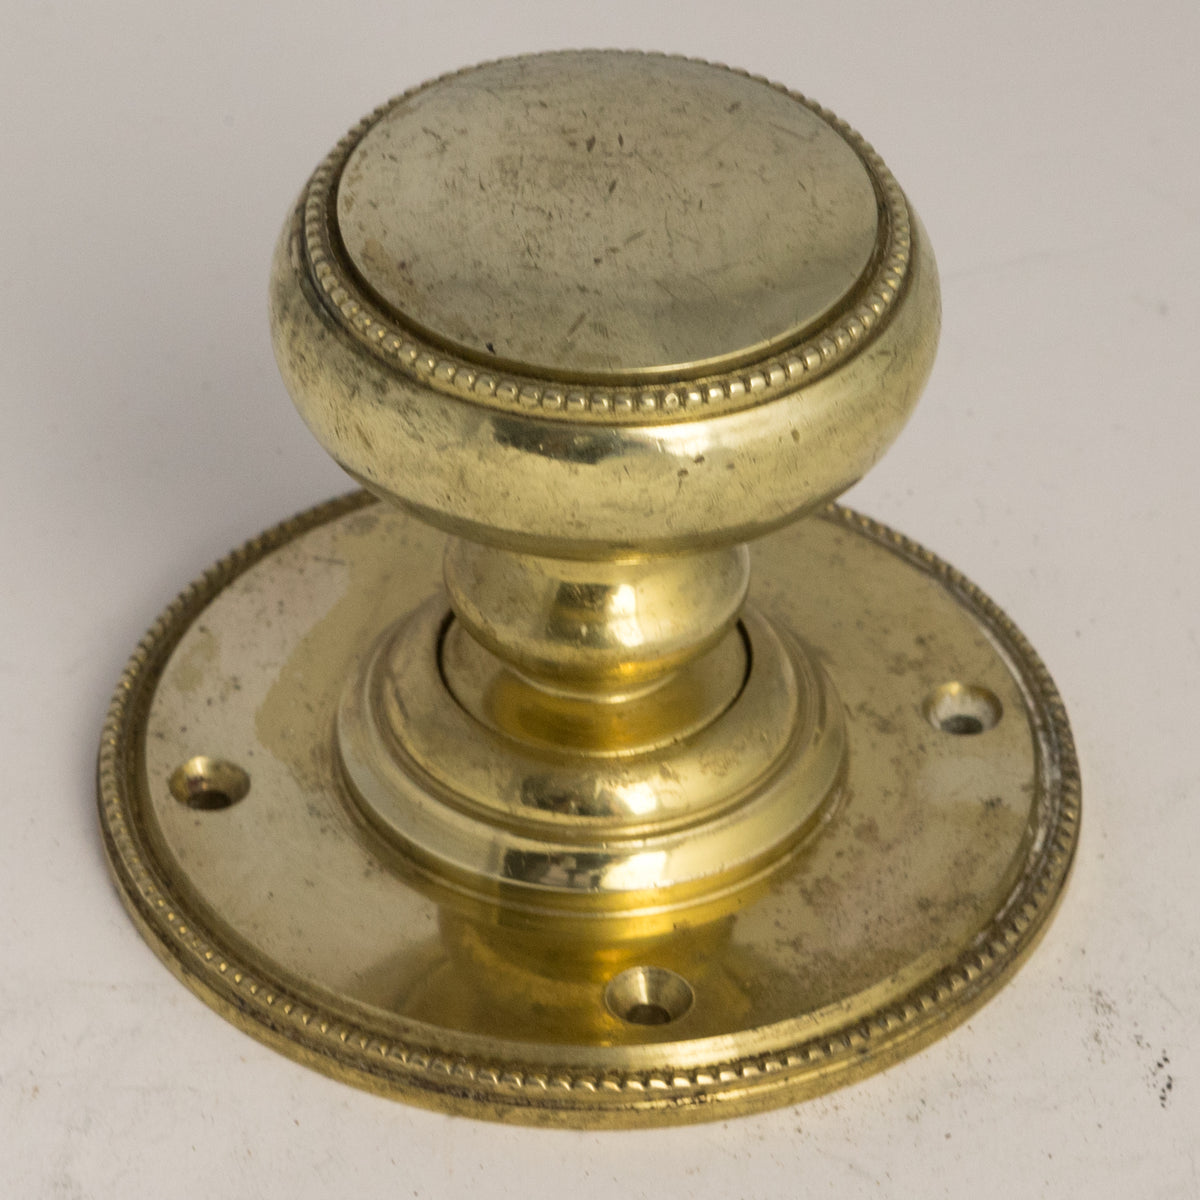 Reclaimed Antique Solid Brass Door Knob | The Architectural Forum